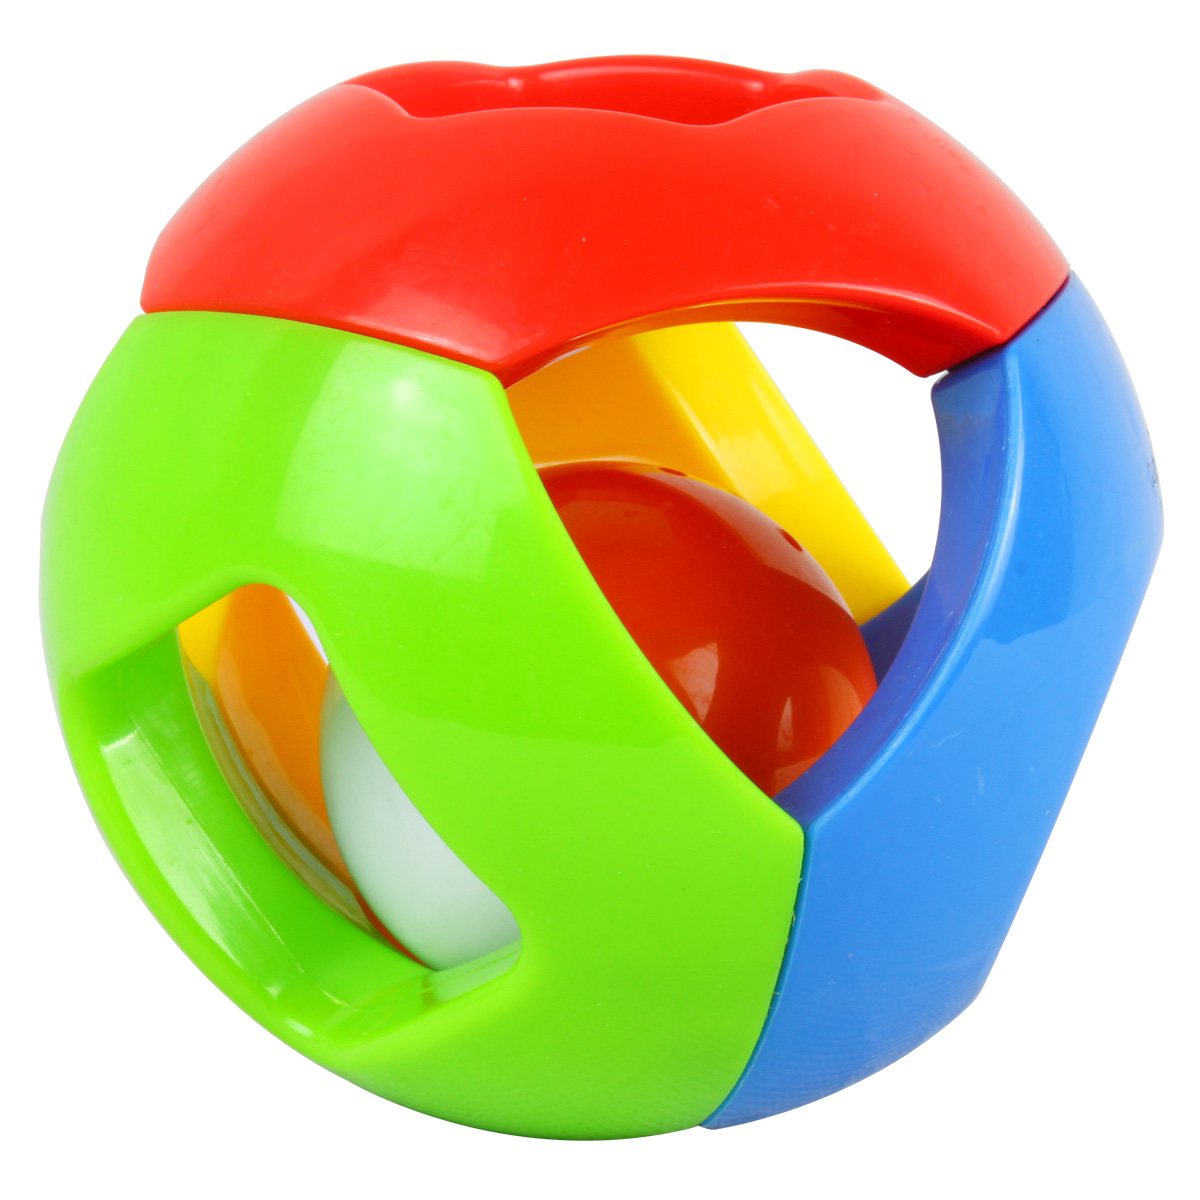 babies toys Picture - More Detailed Picture about Puzzle ball ...